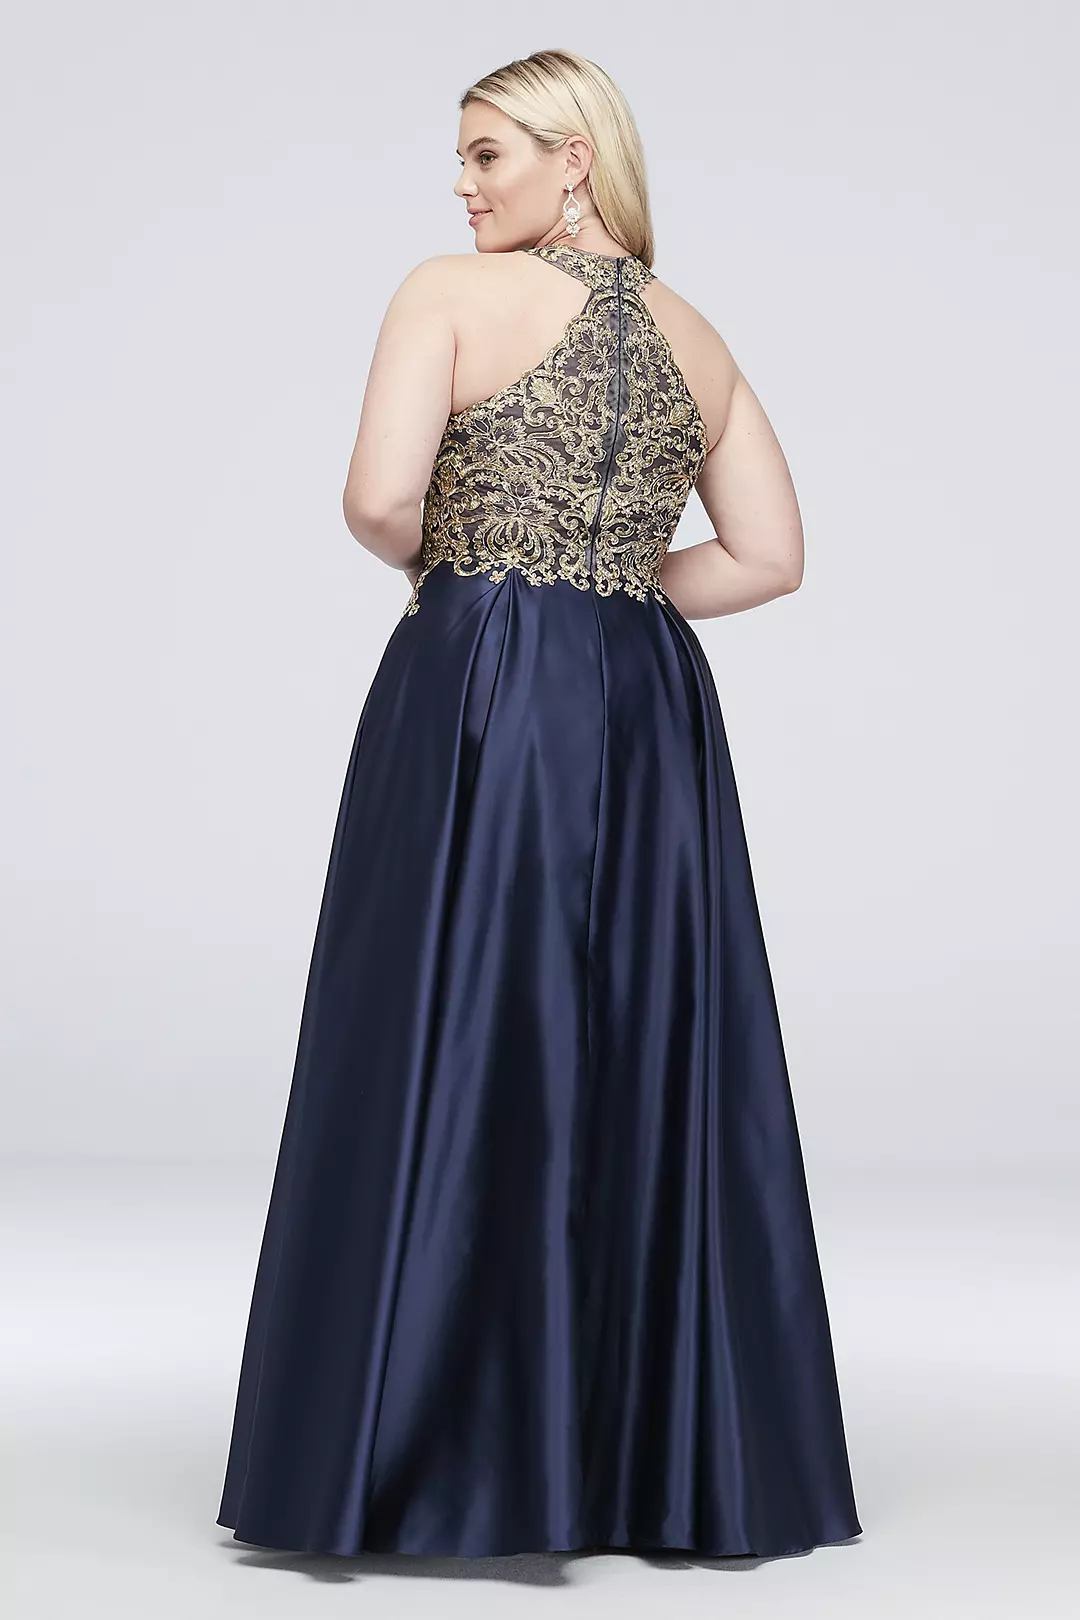 Metallic Lace and Satin Round Neck Ball Gown Image 2